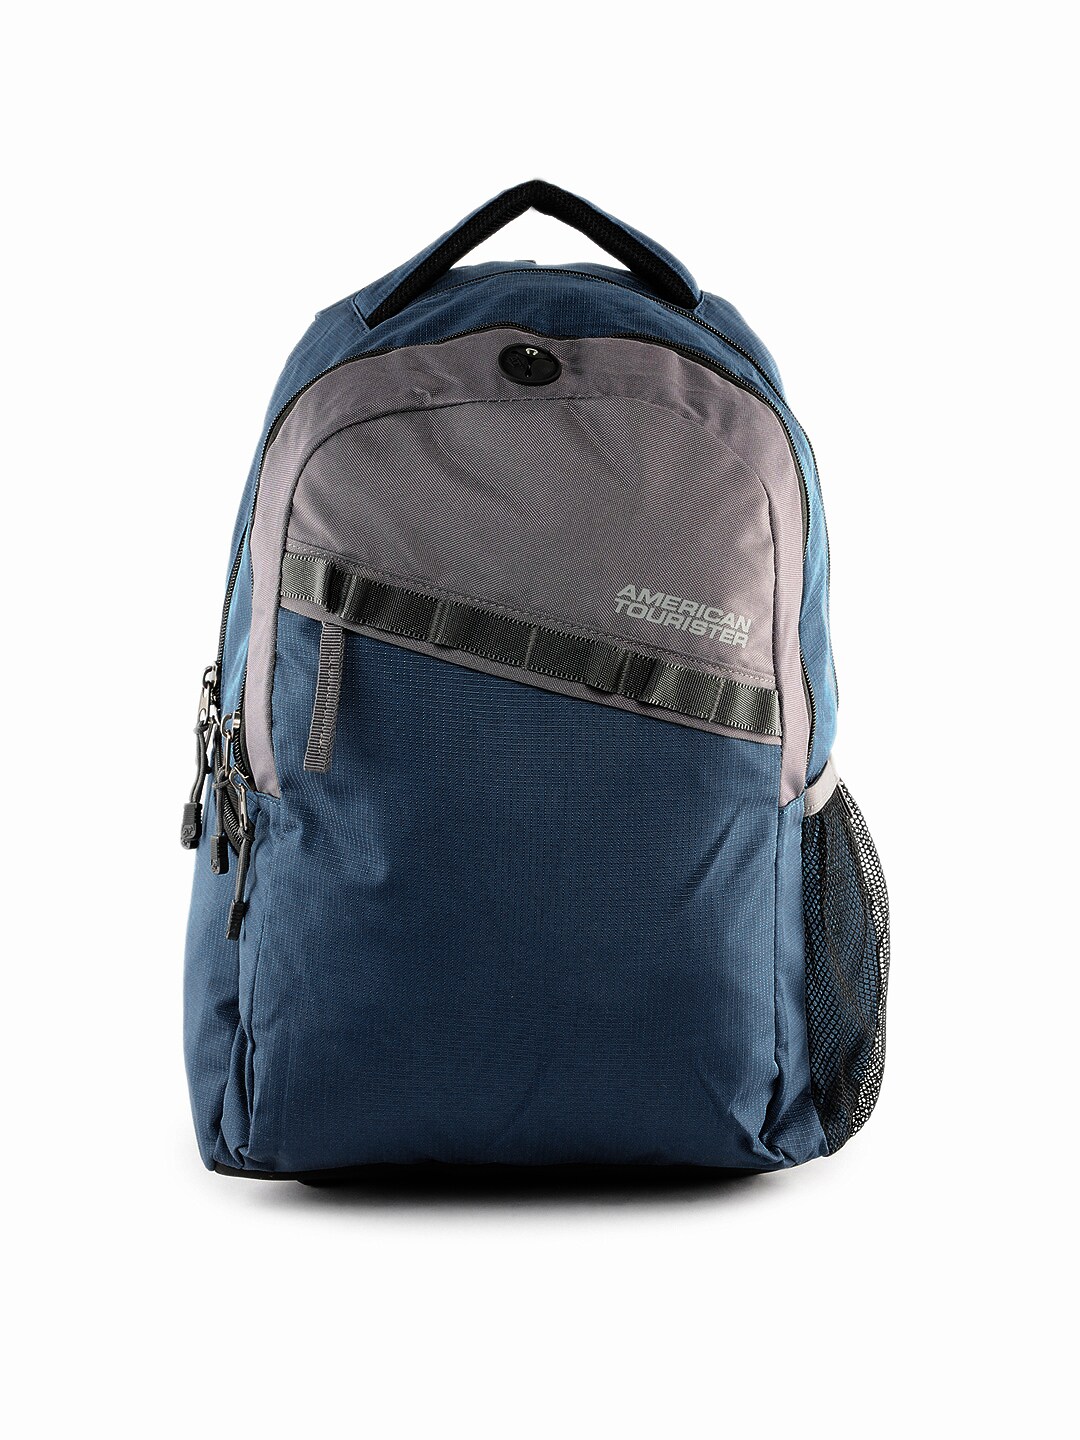 American Tourister Unisex Buzz Blue Backpack